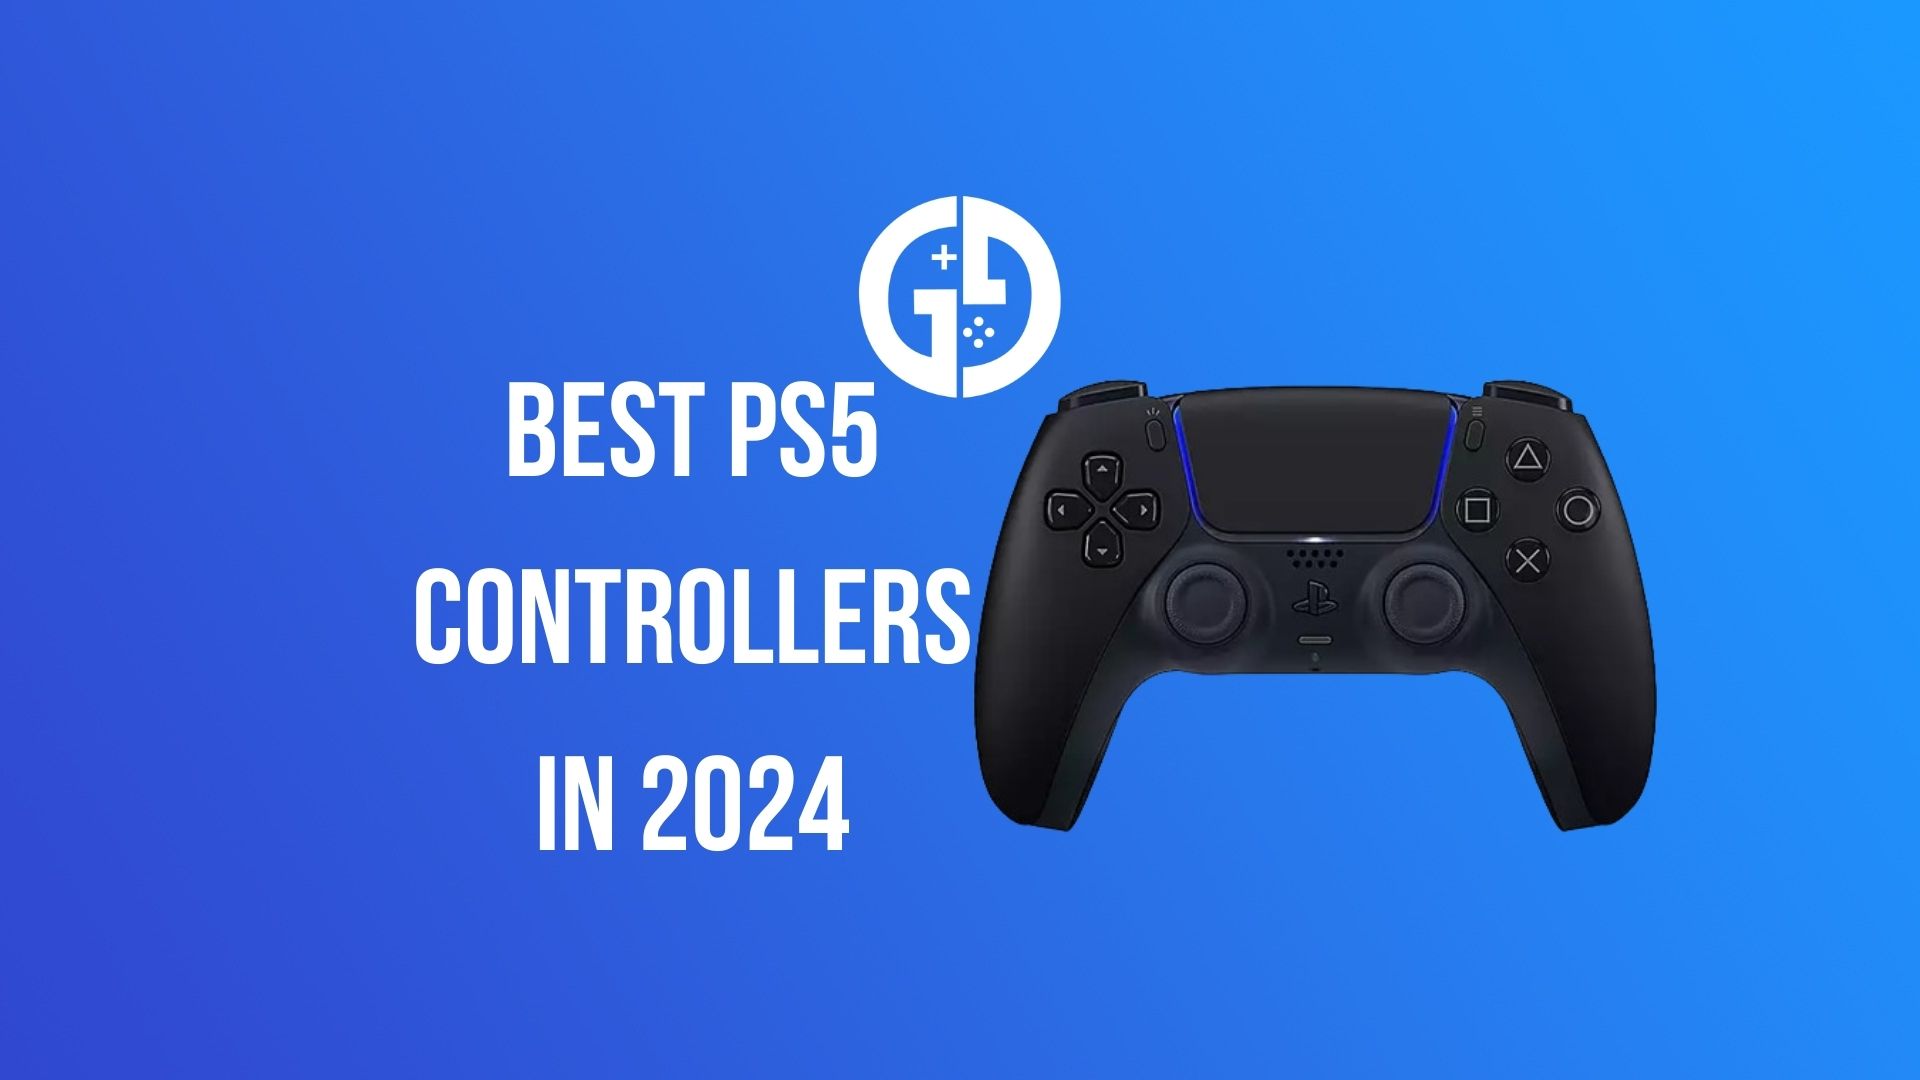 The best way to play Diablo 4 is with a PS5 DualSense controller